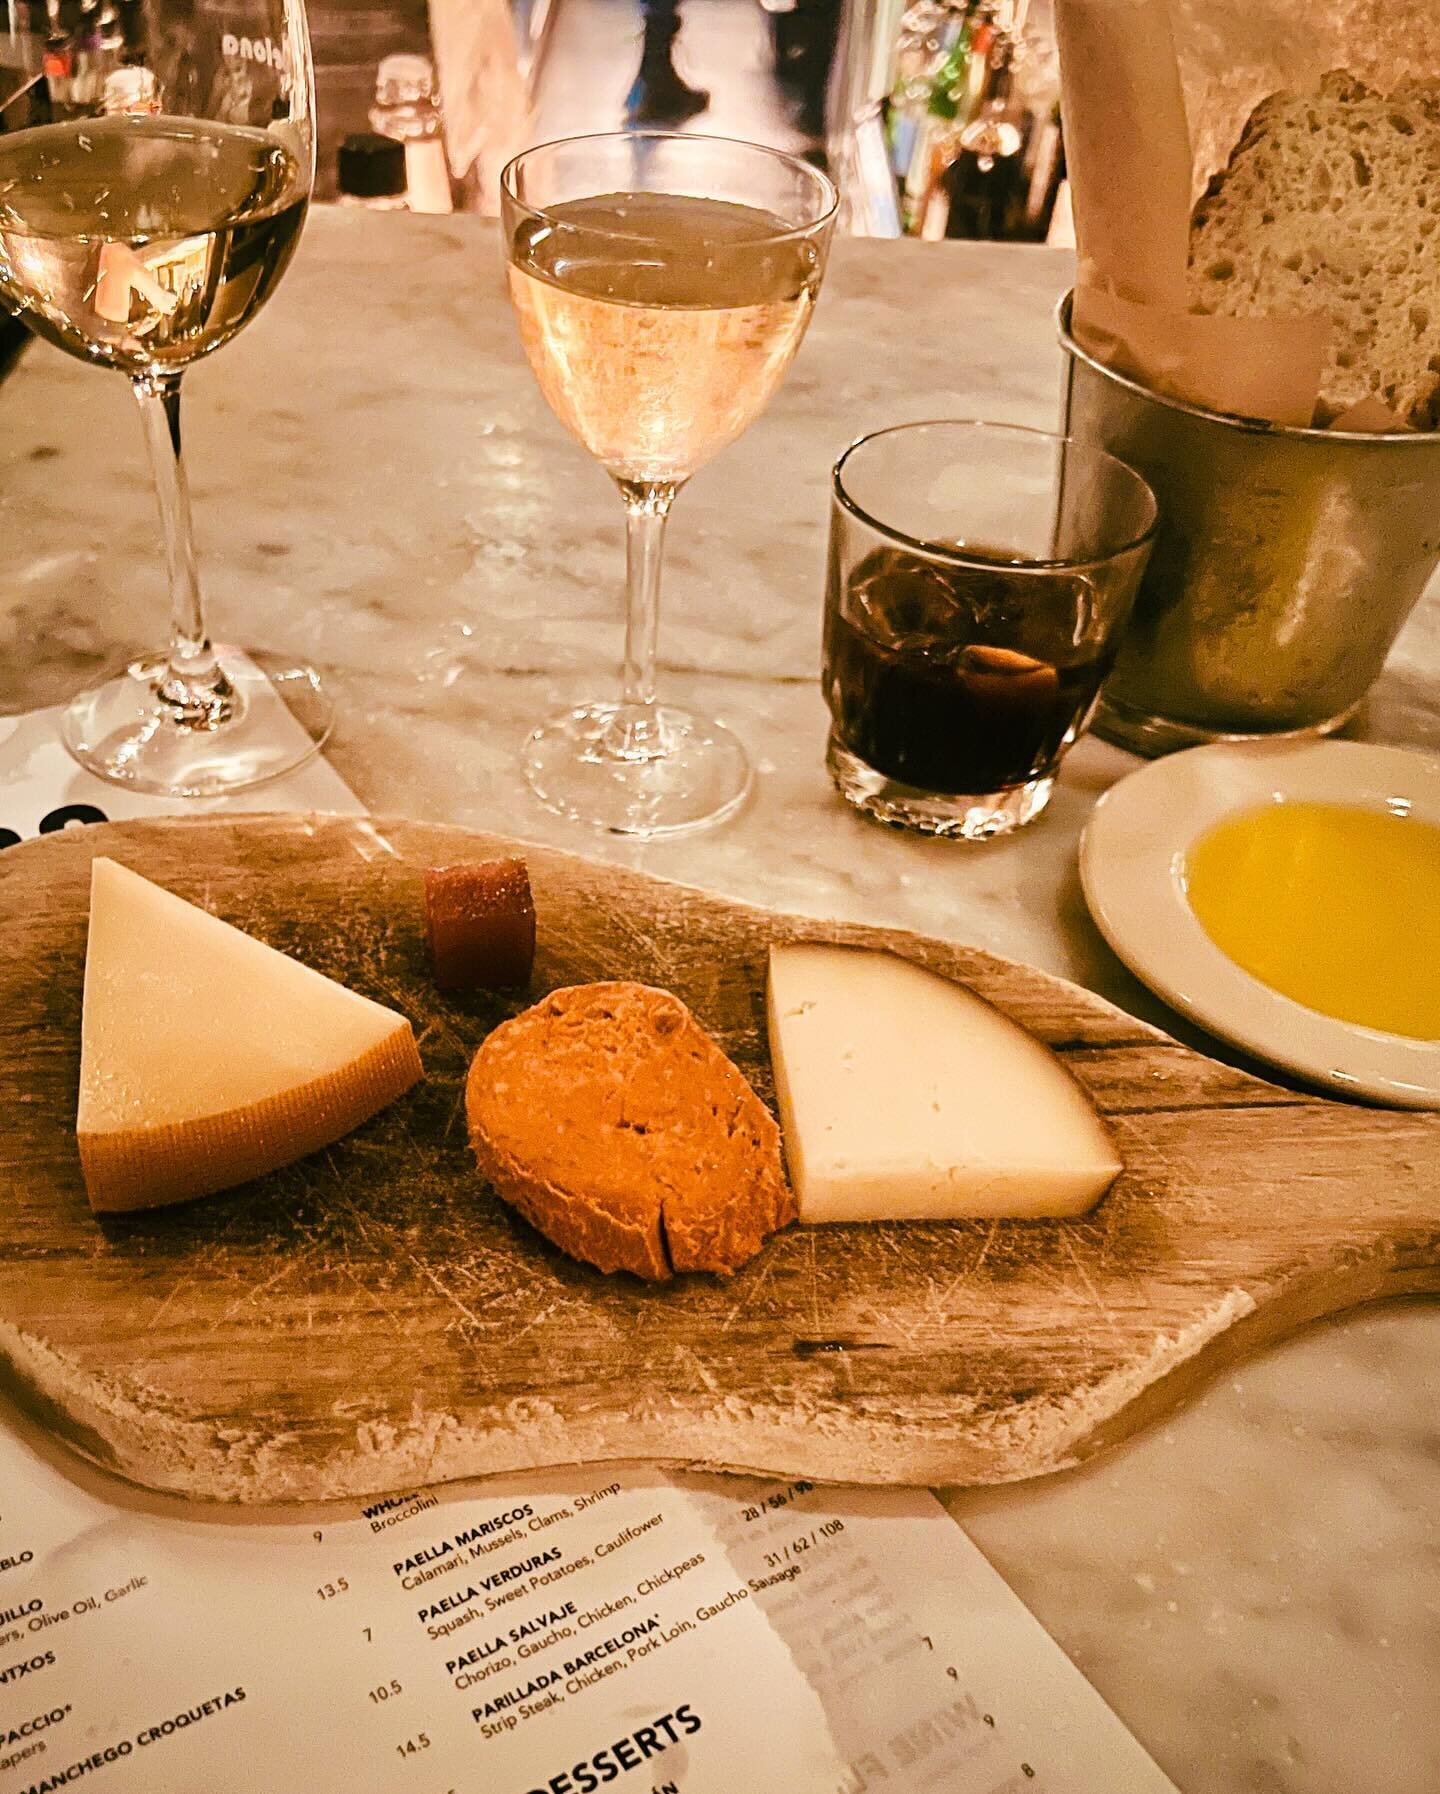 DC in the rain, fueling up at the insanely popular @barcelonawinebar - my happy place on 14th street. A great flight of aperitif wines with cheese and sobresada, and paella (with fantastic socrat - IYKYK) and a flight of grenache &ldquo;on the rocks&